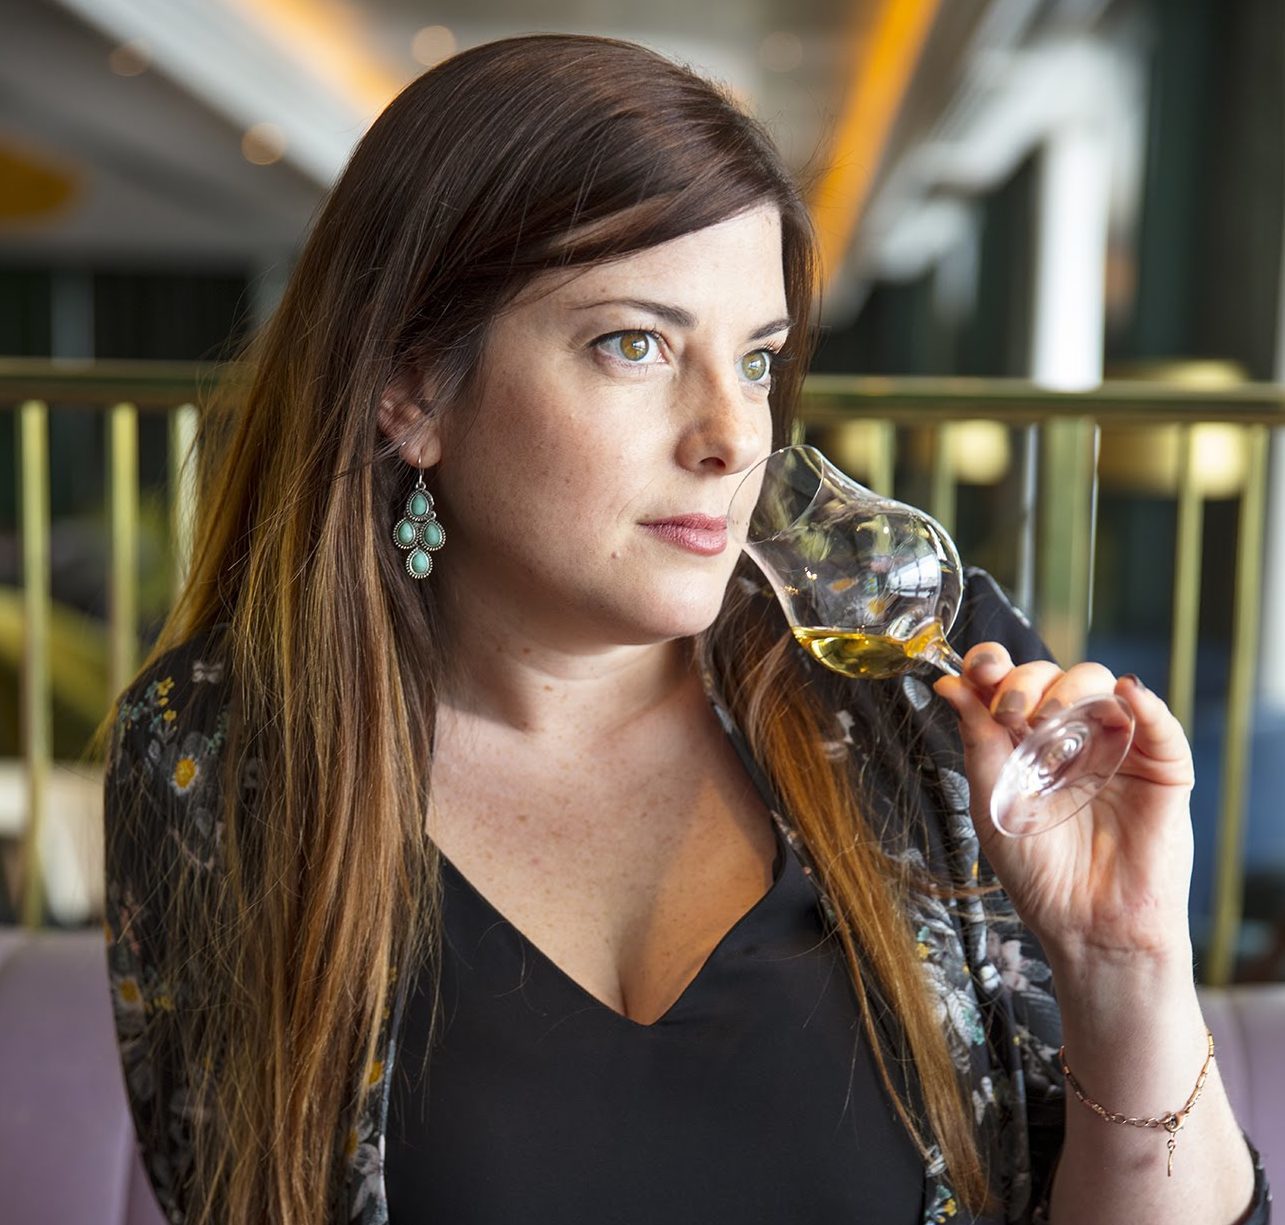 Becky Paskin is the editor of scotchwhisky.com